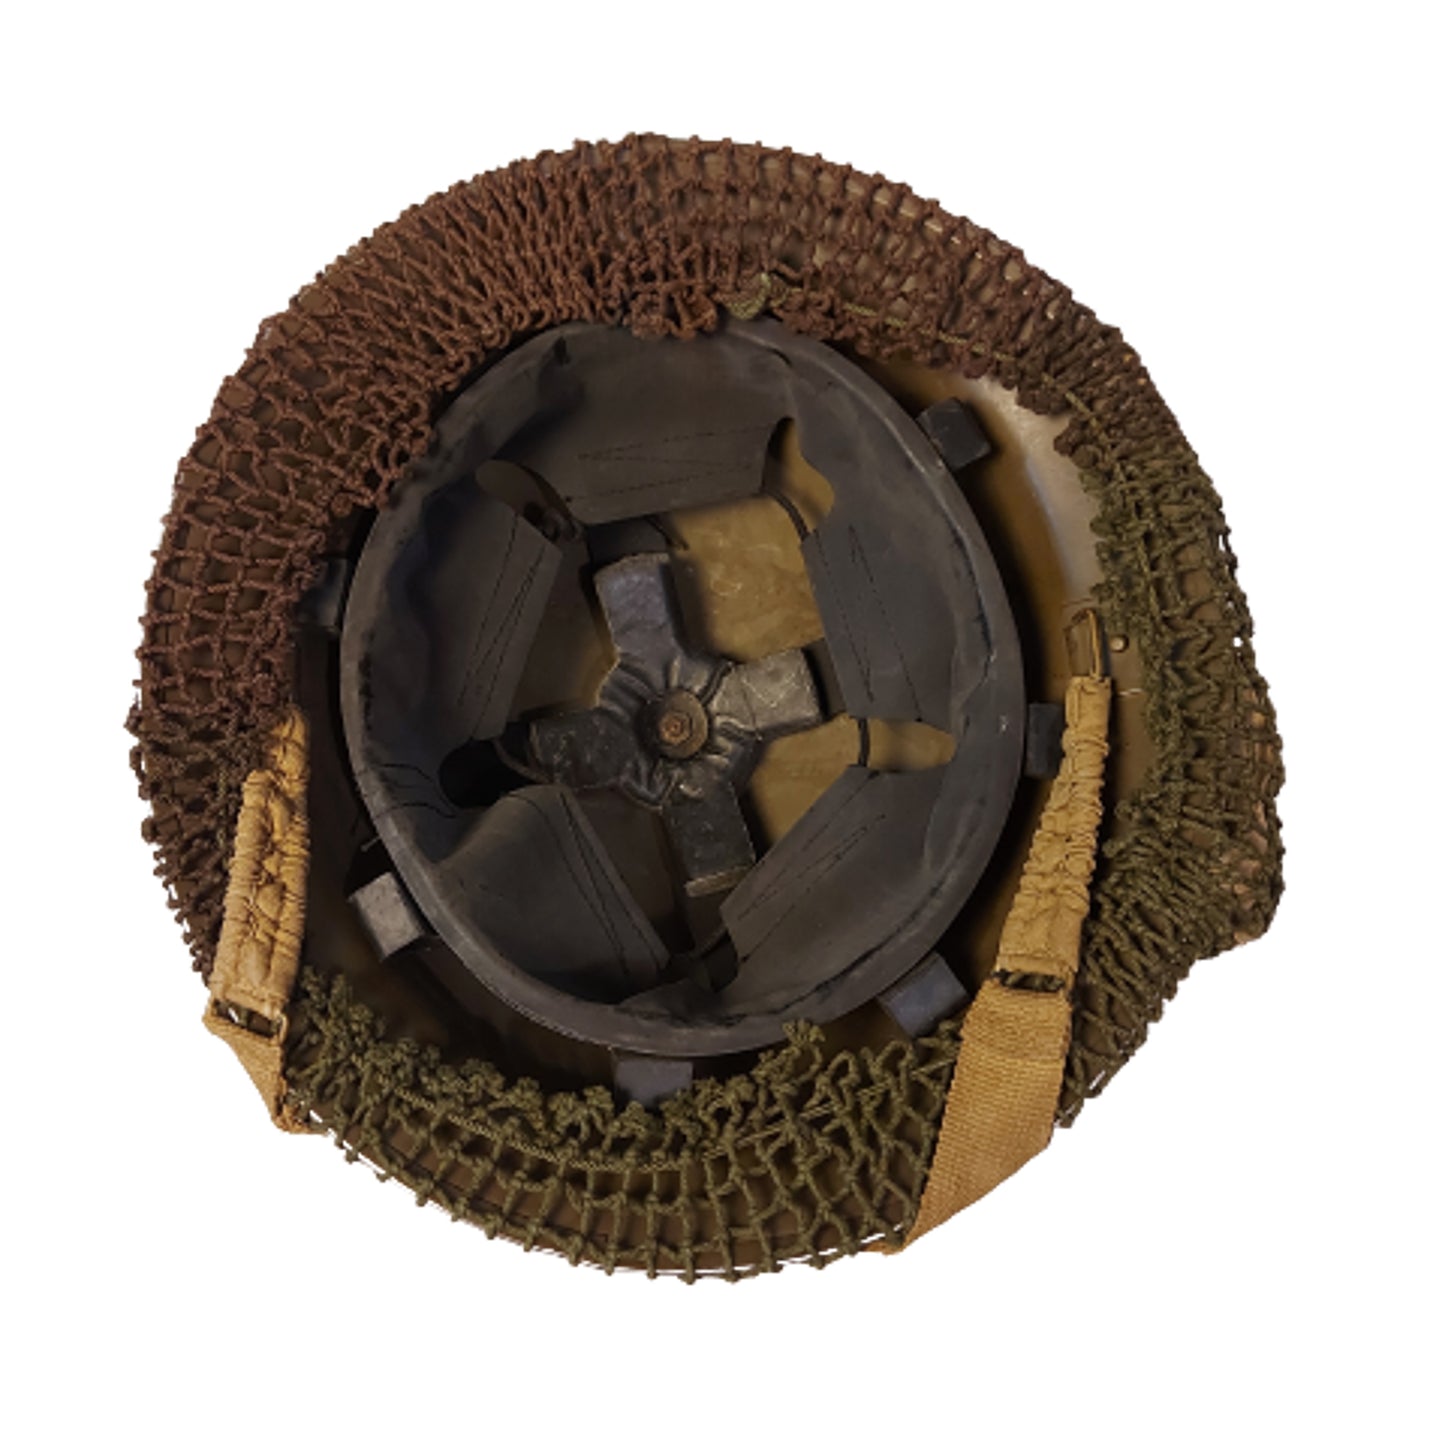 WW2 Canadian Combat Helmet With Camo Net And Bandage Pack 1941